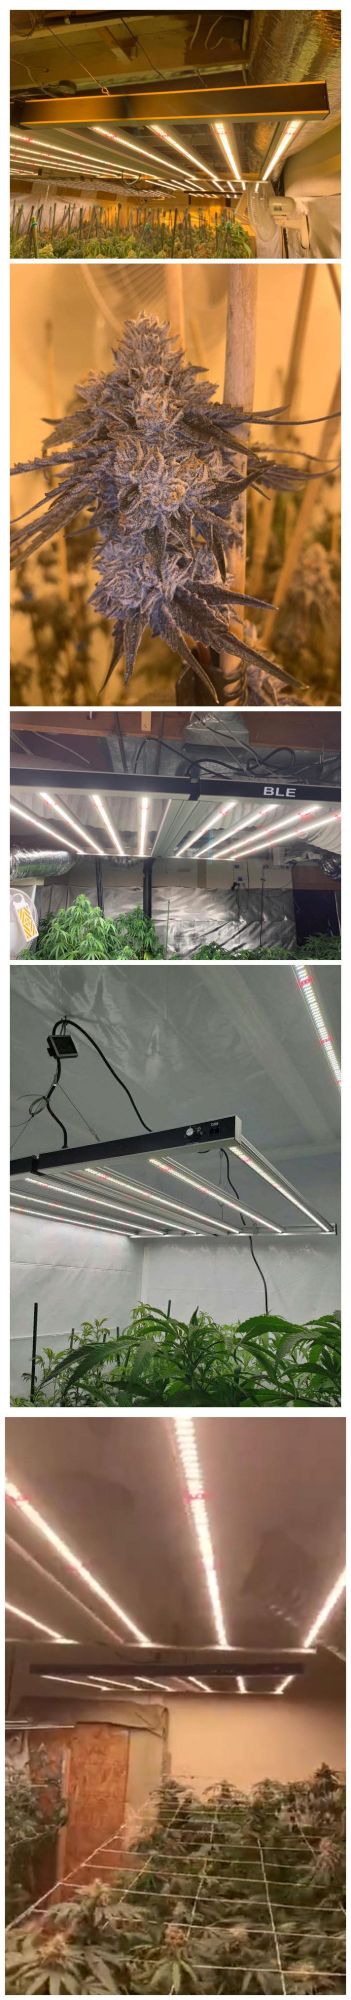 Indoor High Ceiling Greenhouse LED Grow Light Hydroponic Growing Systems LED Growing Lighting for Greenhouse